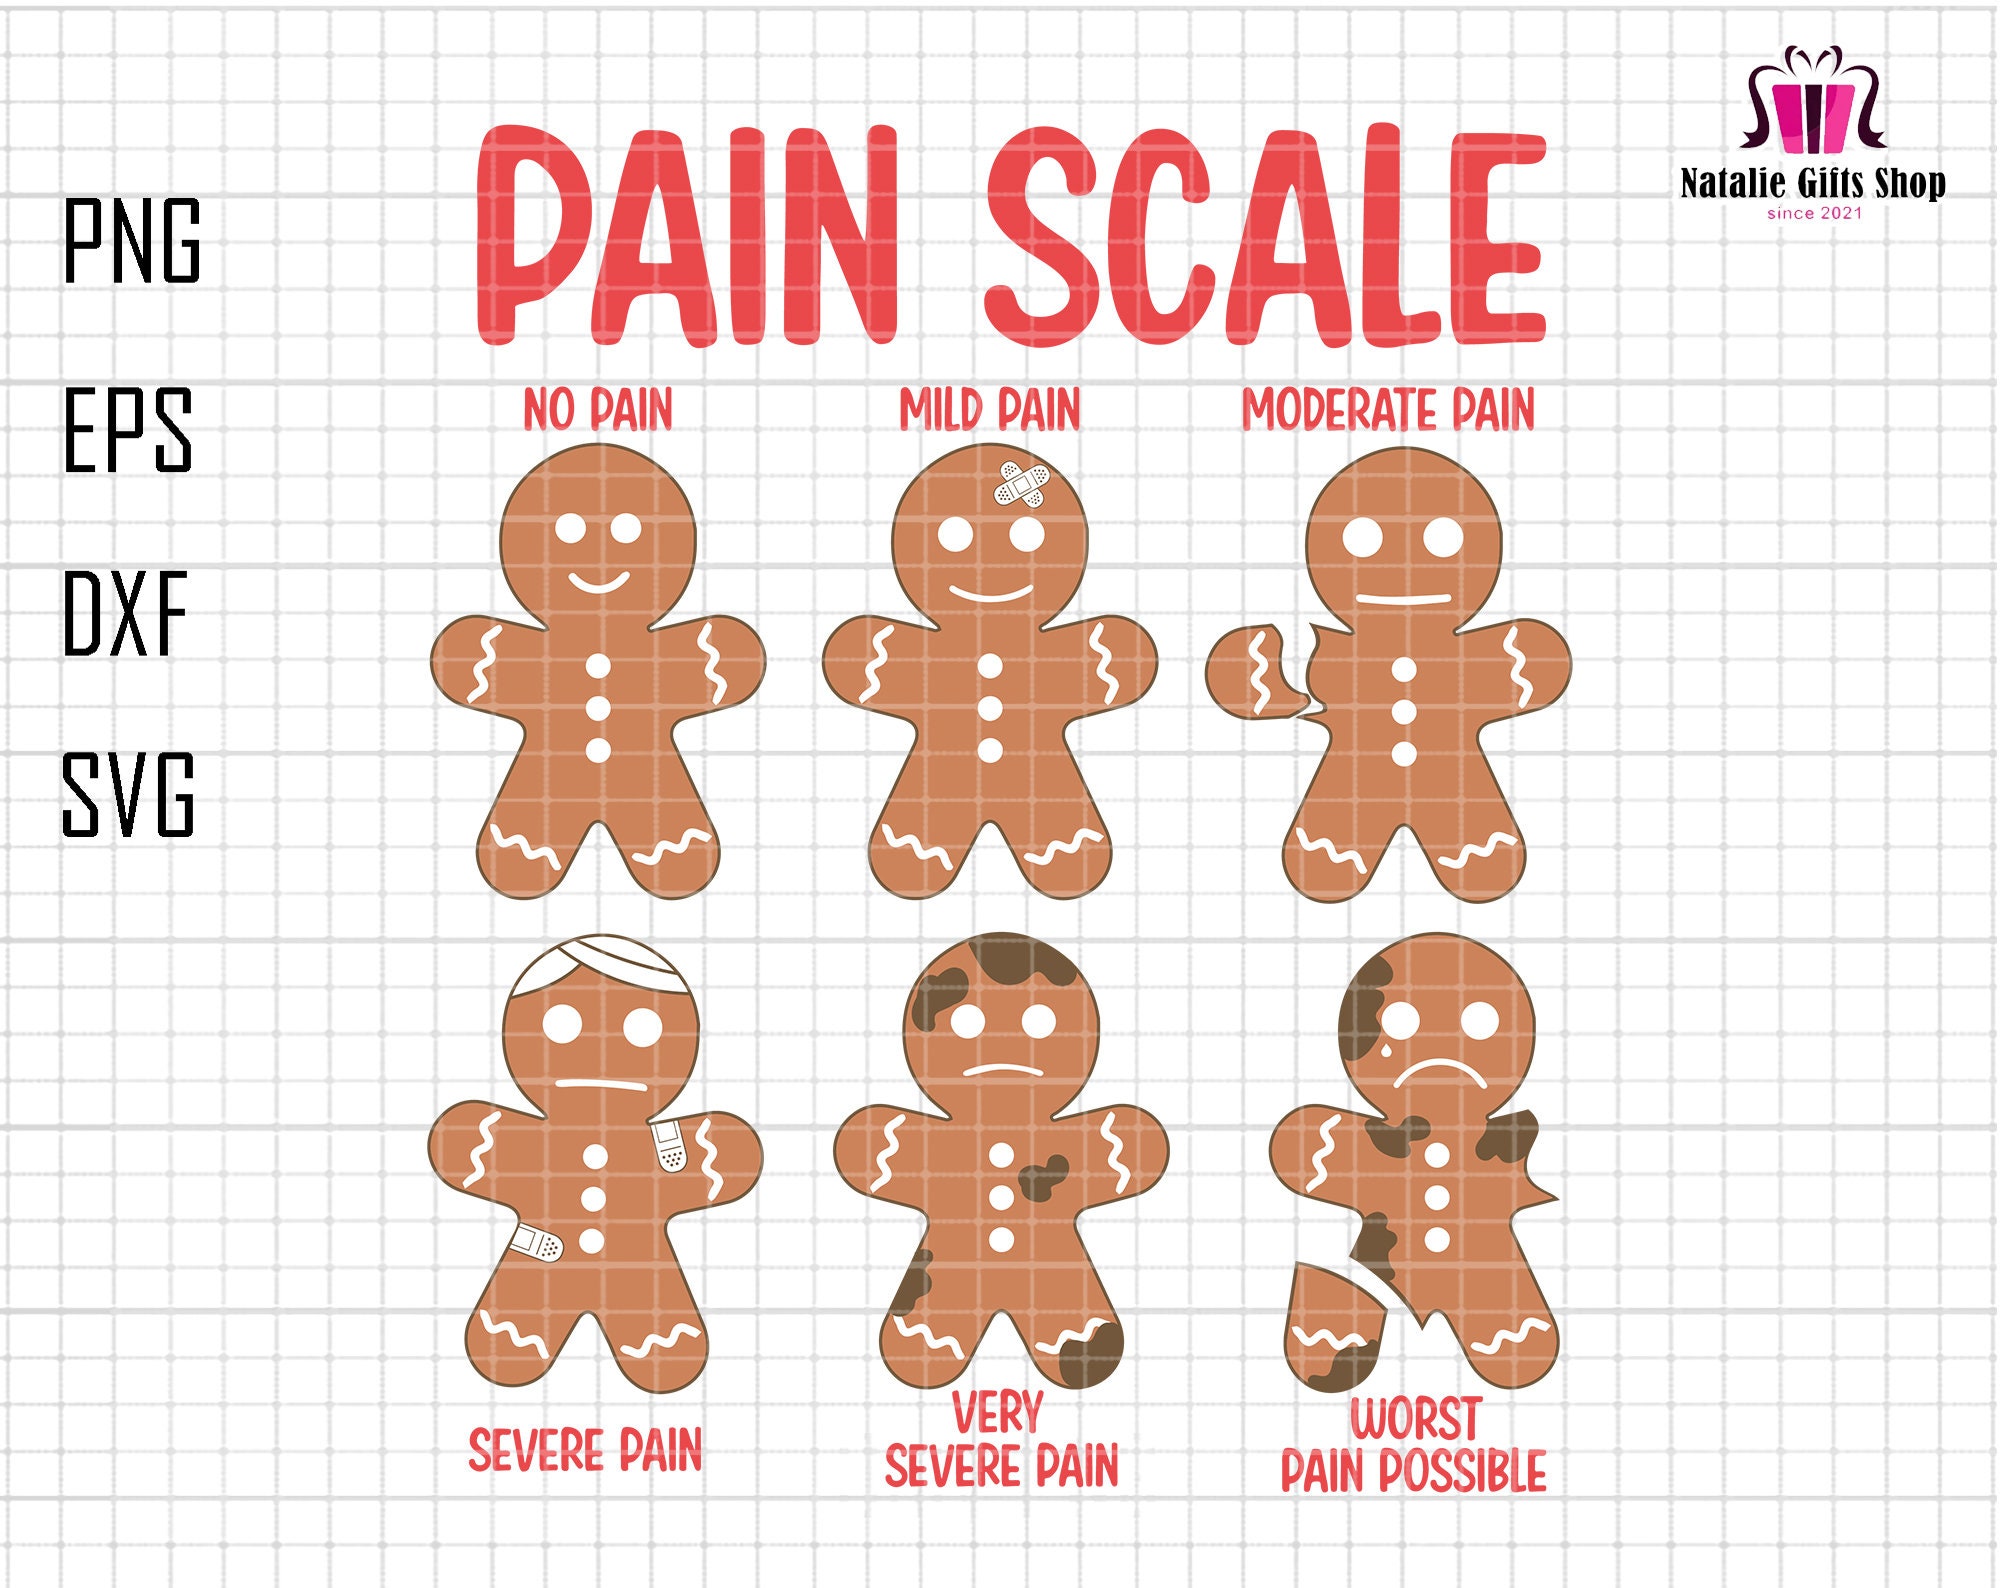 Wong-baker FACES® Pain Rating Scale Notepad 